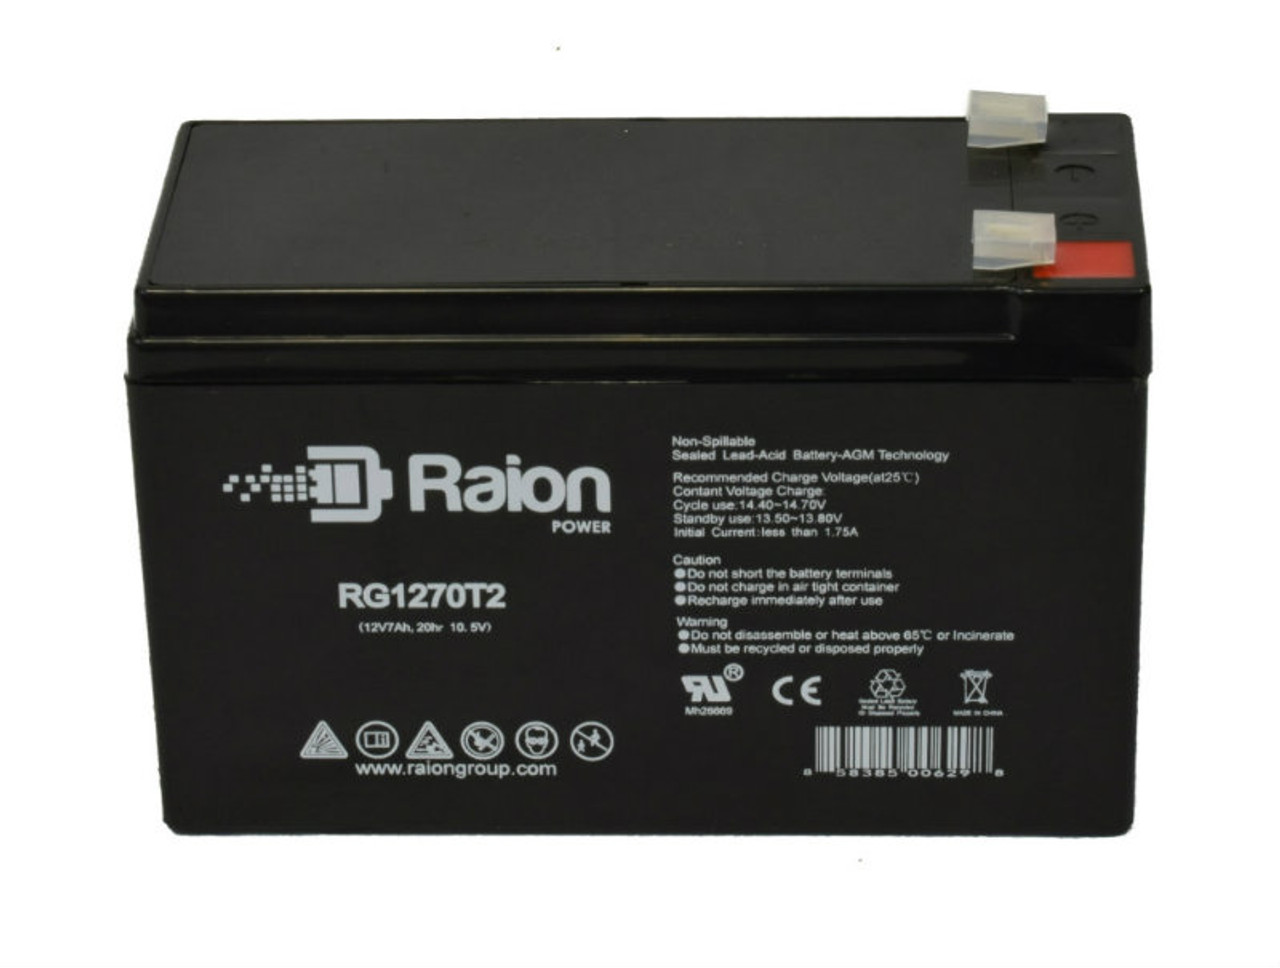 Raion Power RG1270T2 12V 7Ah Lead Acid Battery for CooPower CPD12-7